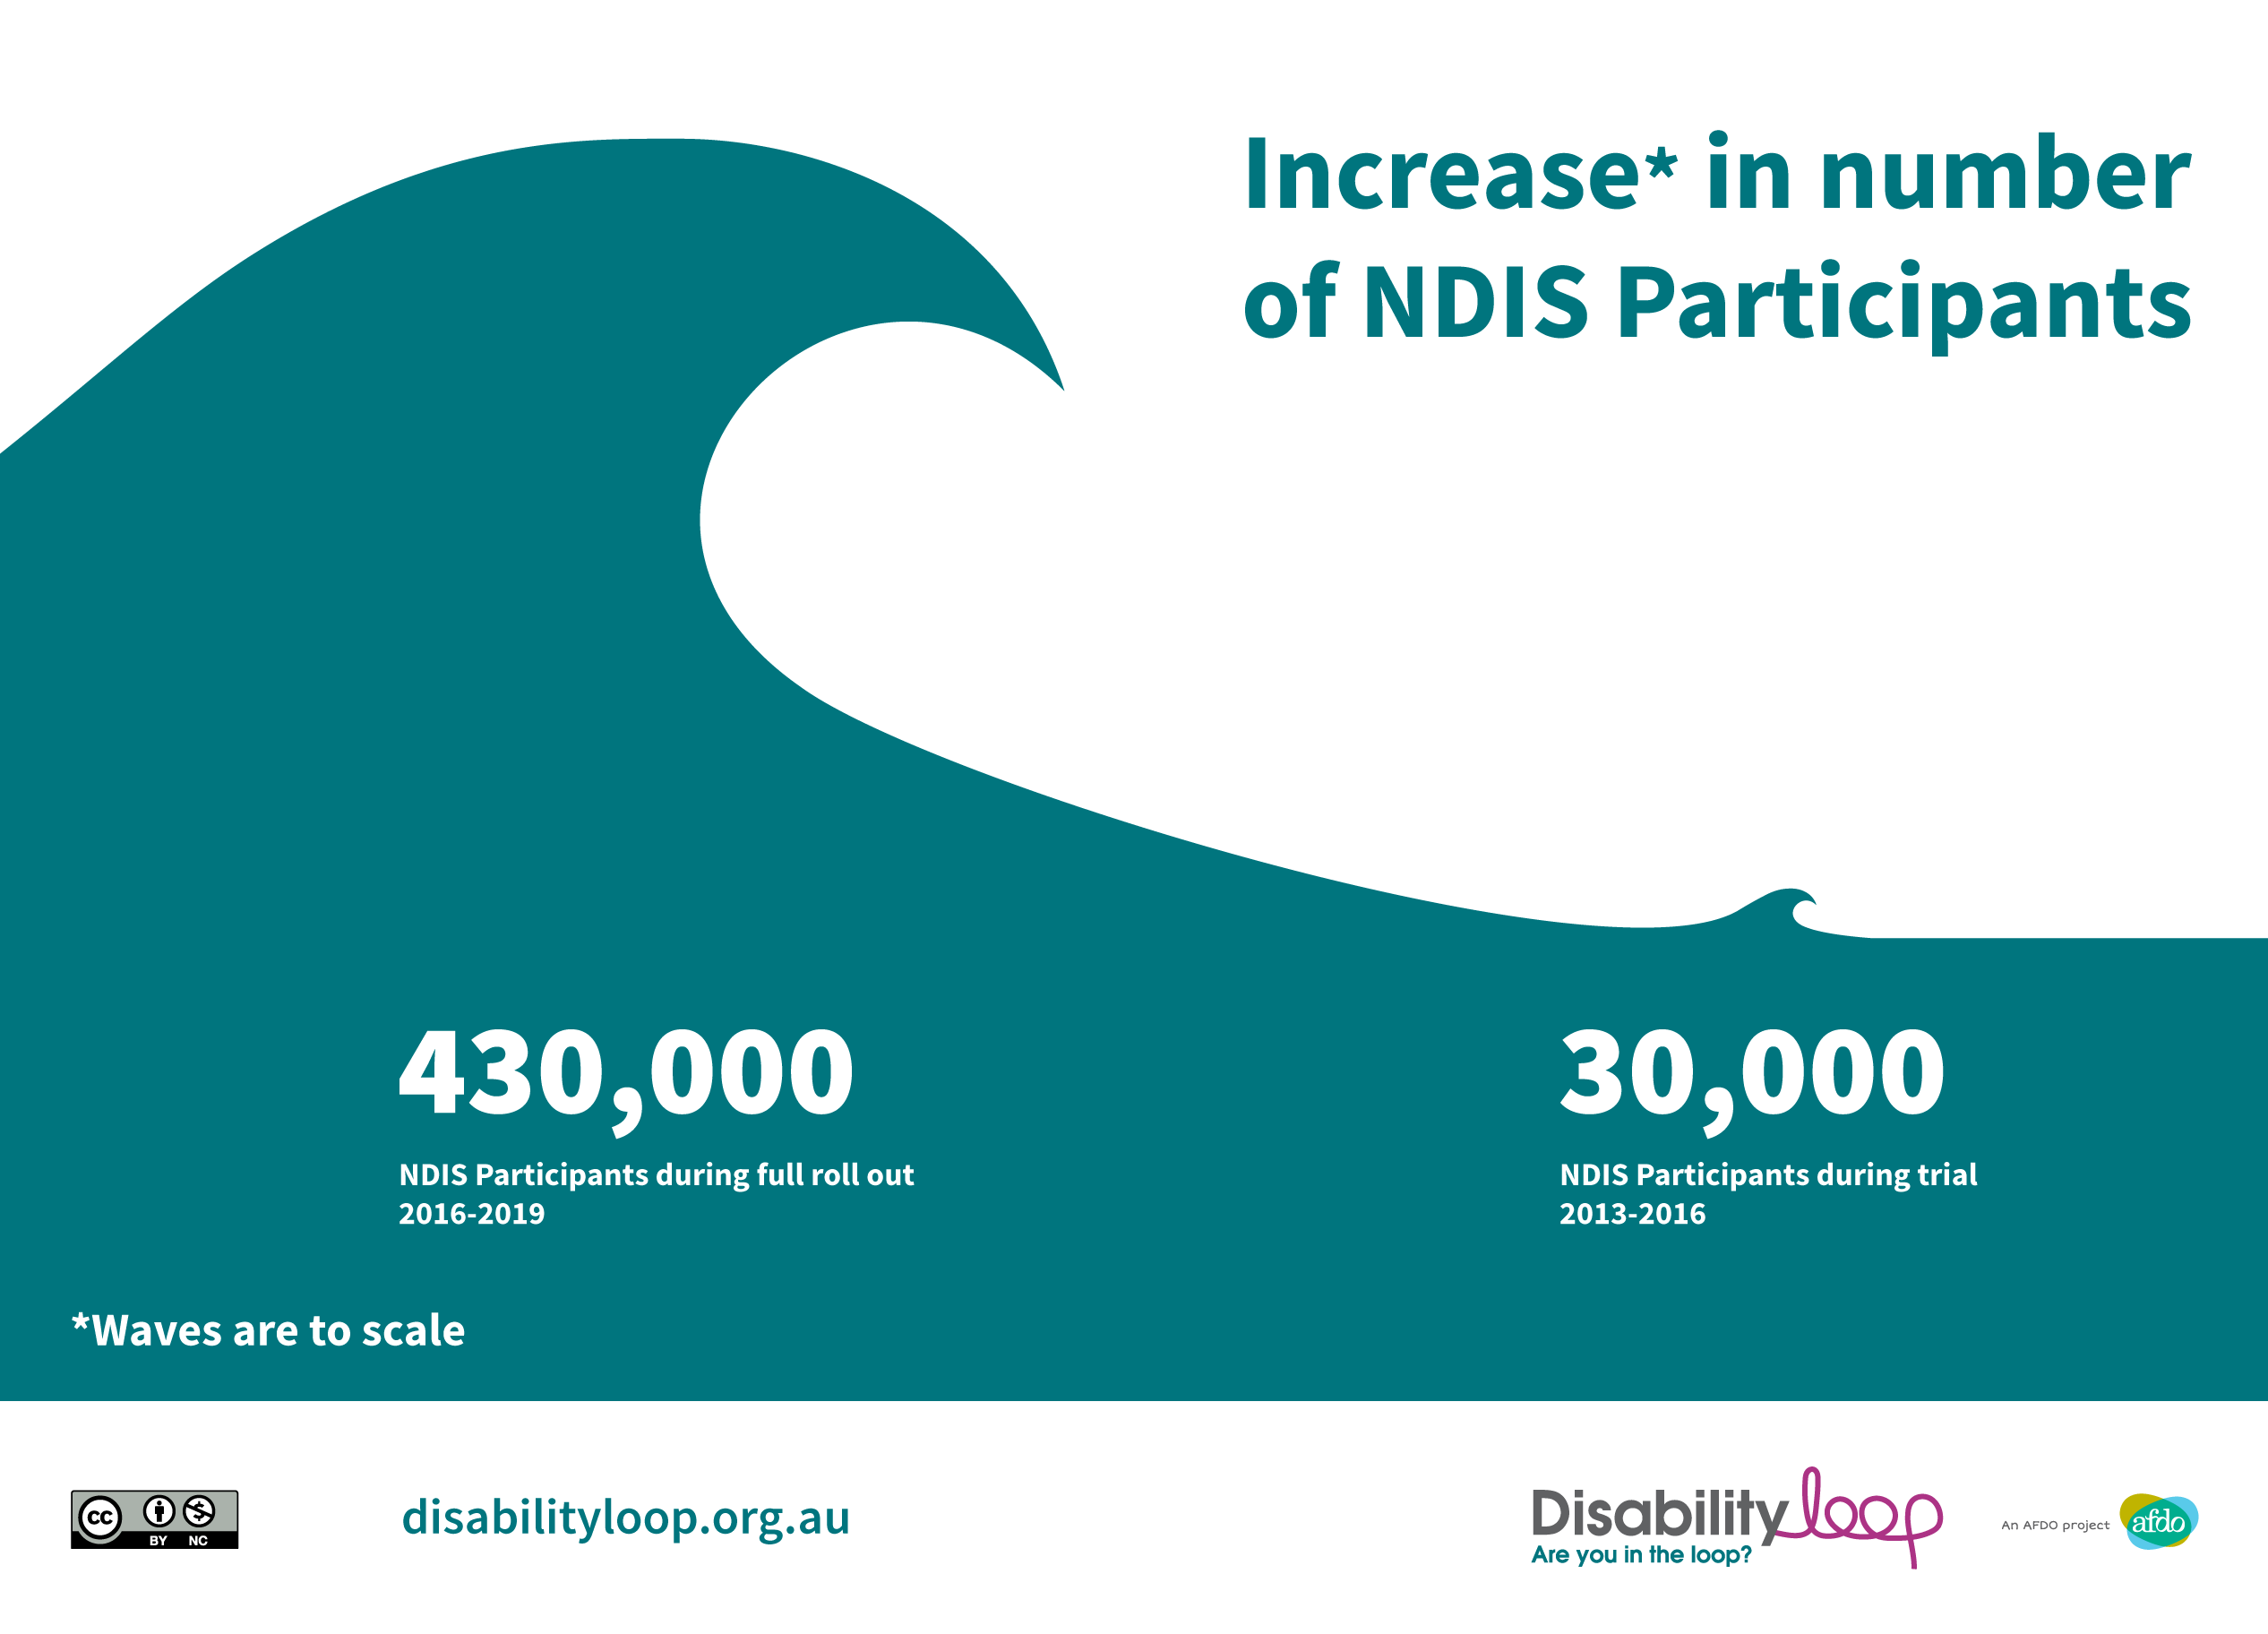 Infographic. Increase* in number of NDIS Participants. *Waves are to scale. 430,000 NDIS Participants during full roll out 2016-2019. 30,000 NDIS Participants during trial 2013-2016. CC BY NC. disabilityloop.org.au. Disability Loop - Are you in the Loop? An AFDO project